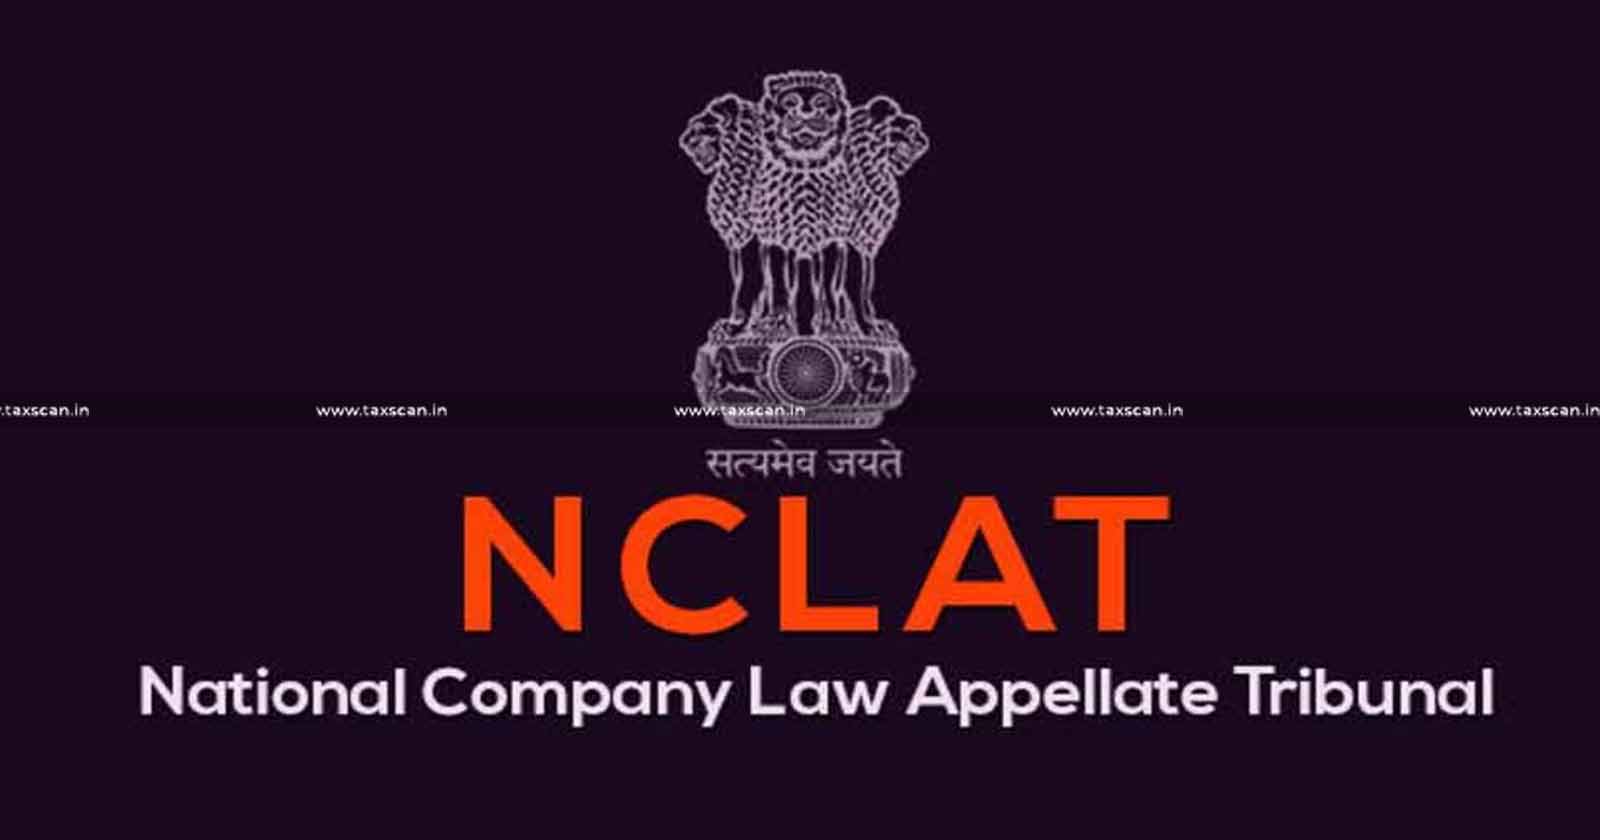 non-compliance of provisions - Resolution plan - IBC - NCLAT - taxscan   